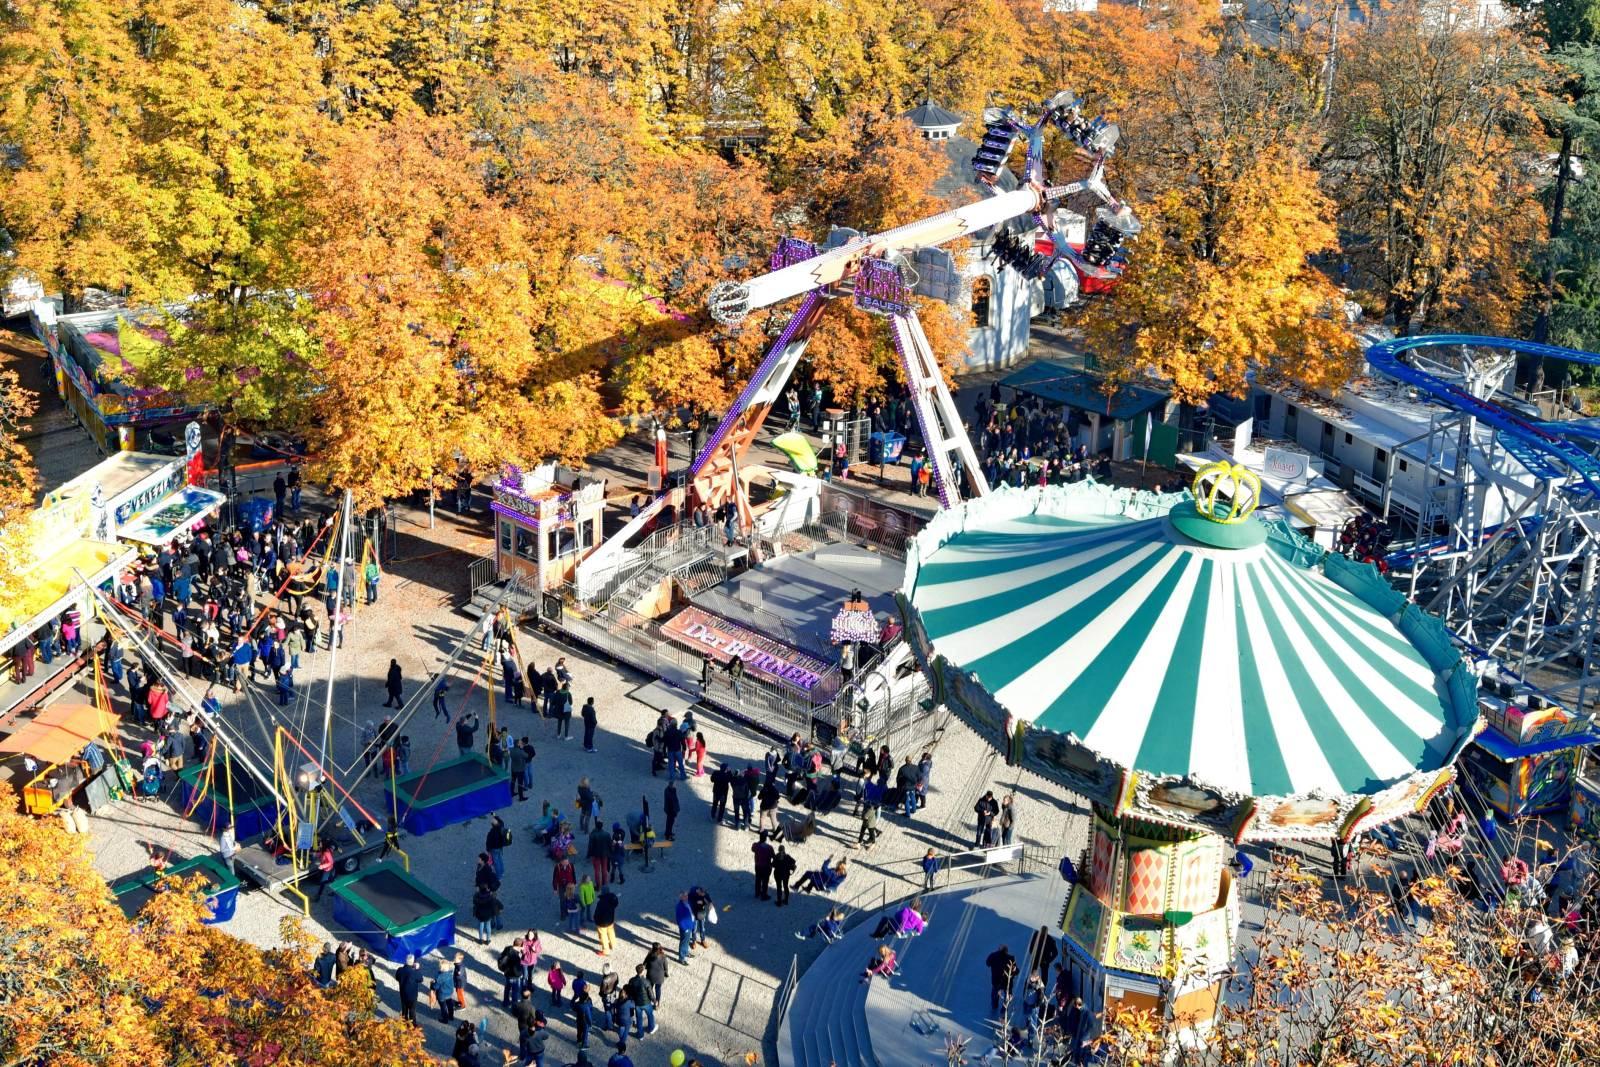 View from above the Rosentalanlage, surrounded by trees bedecked in autumn yellow foliage, with a revolving chain carousel, trampoline and other rides.